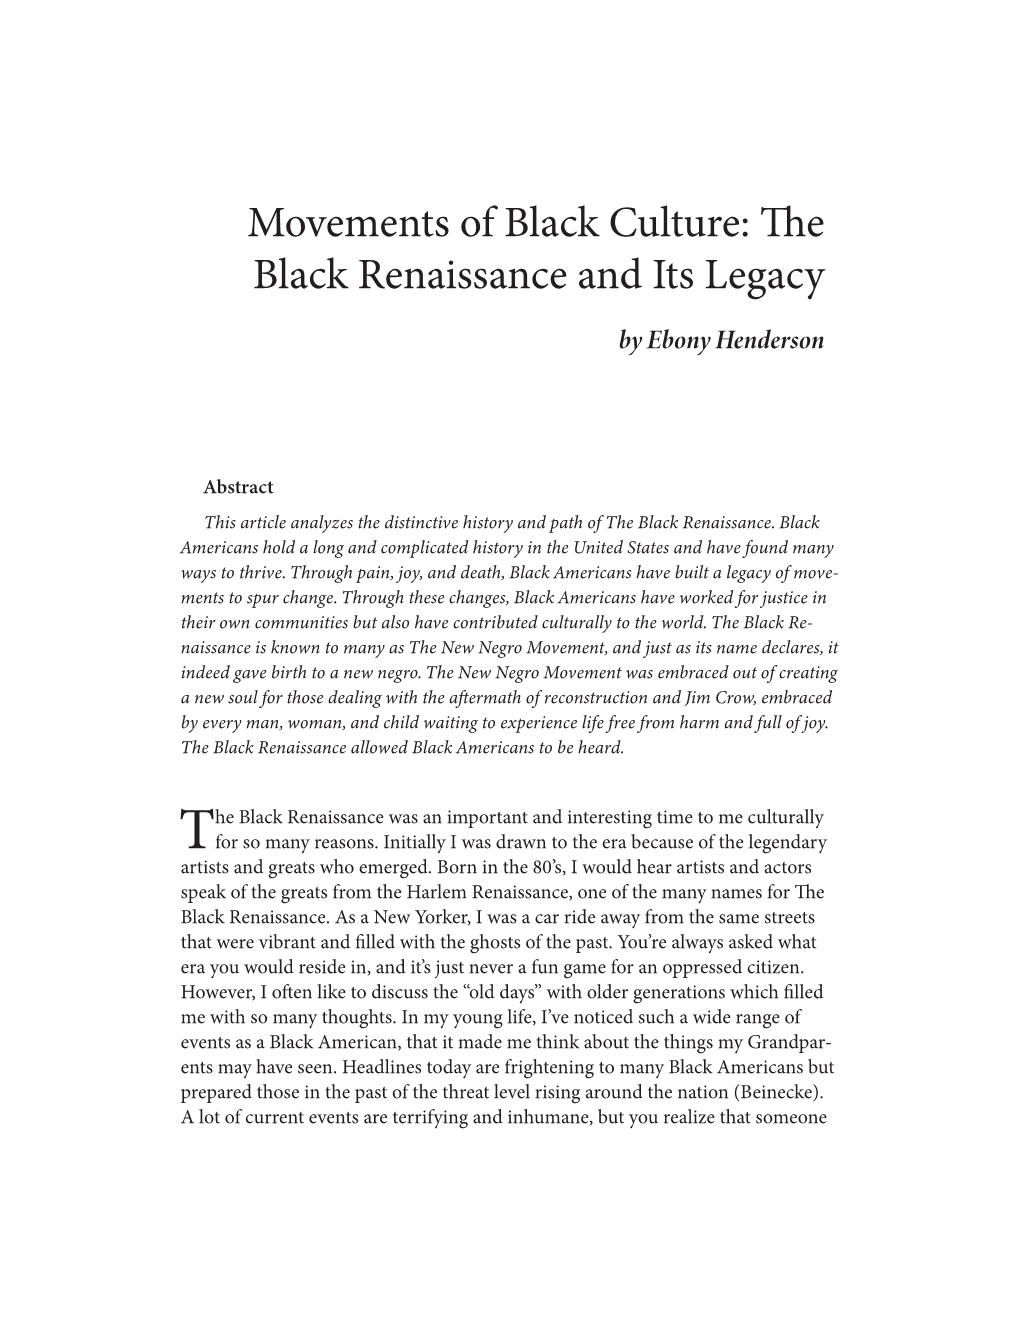 Movements of Black Culture: the Black Renaissance and Its Legacy